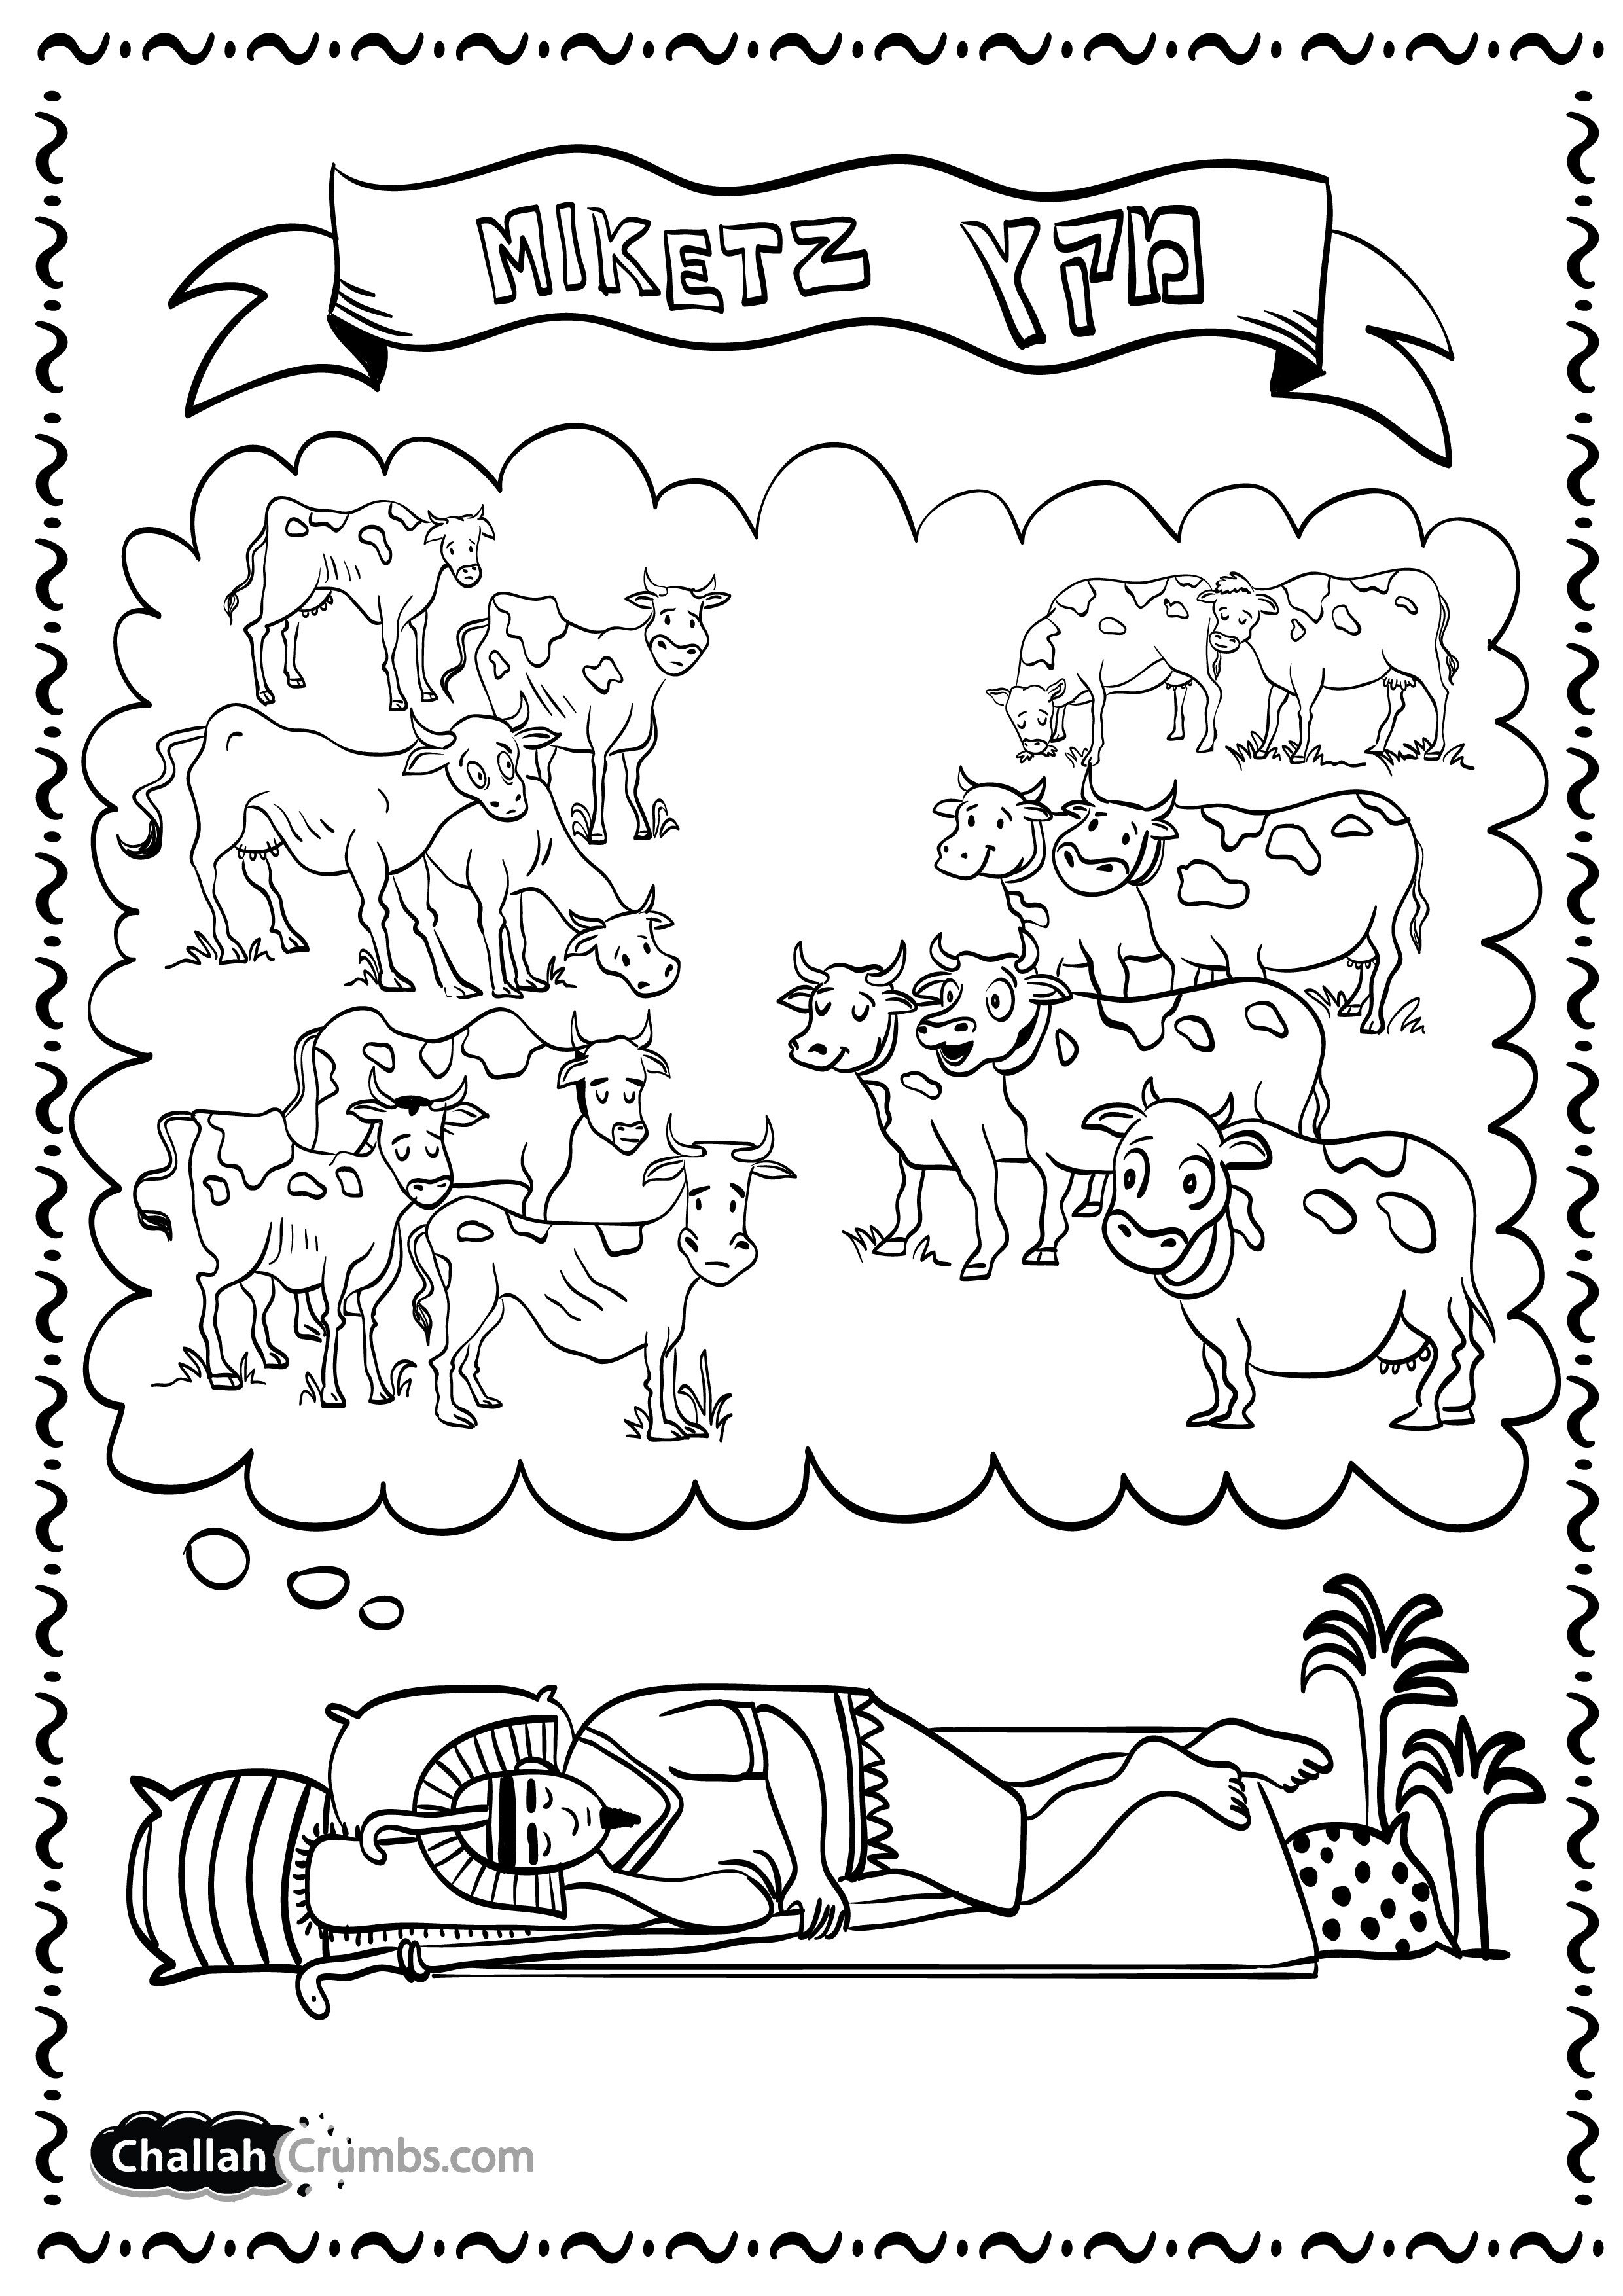 Parshat miketz coloring page click on picture to print